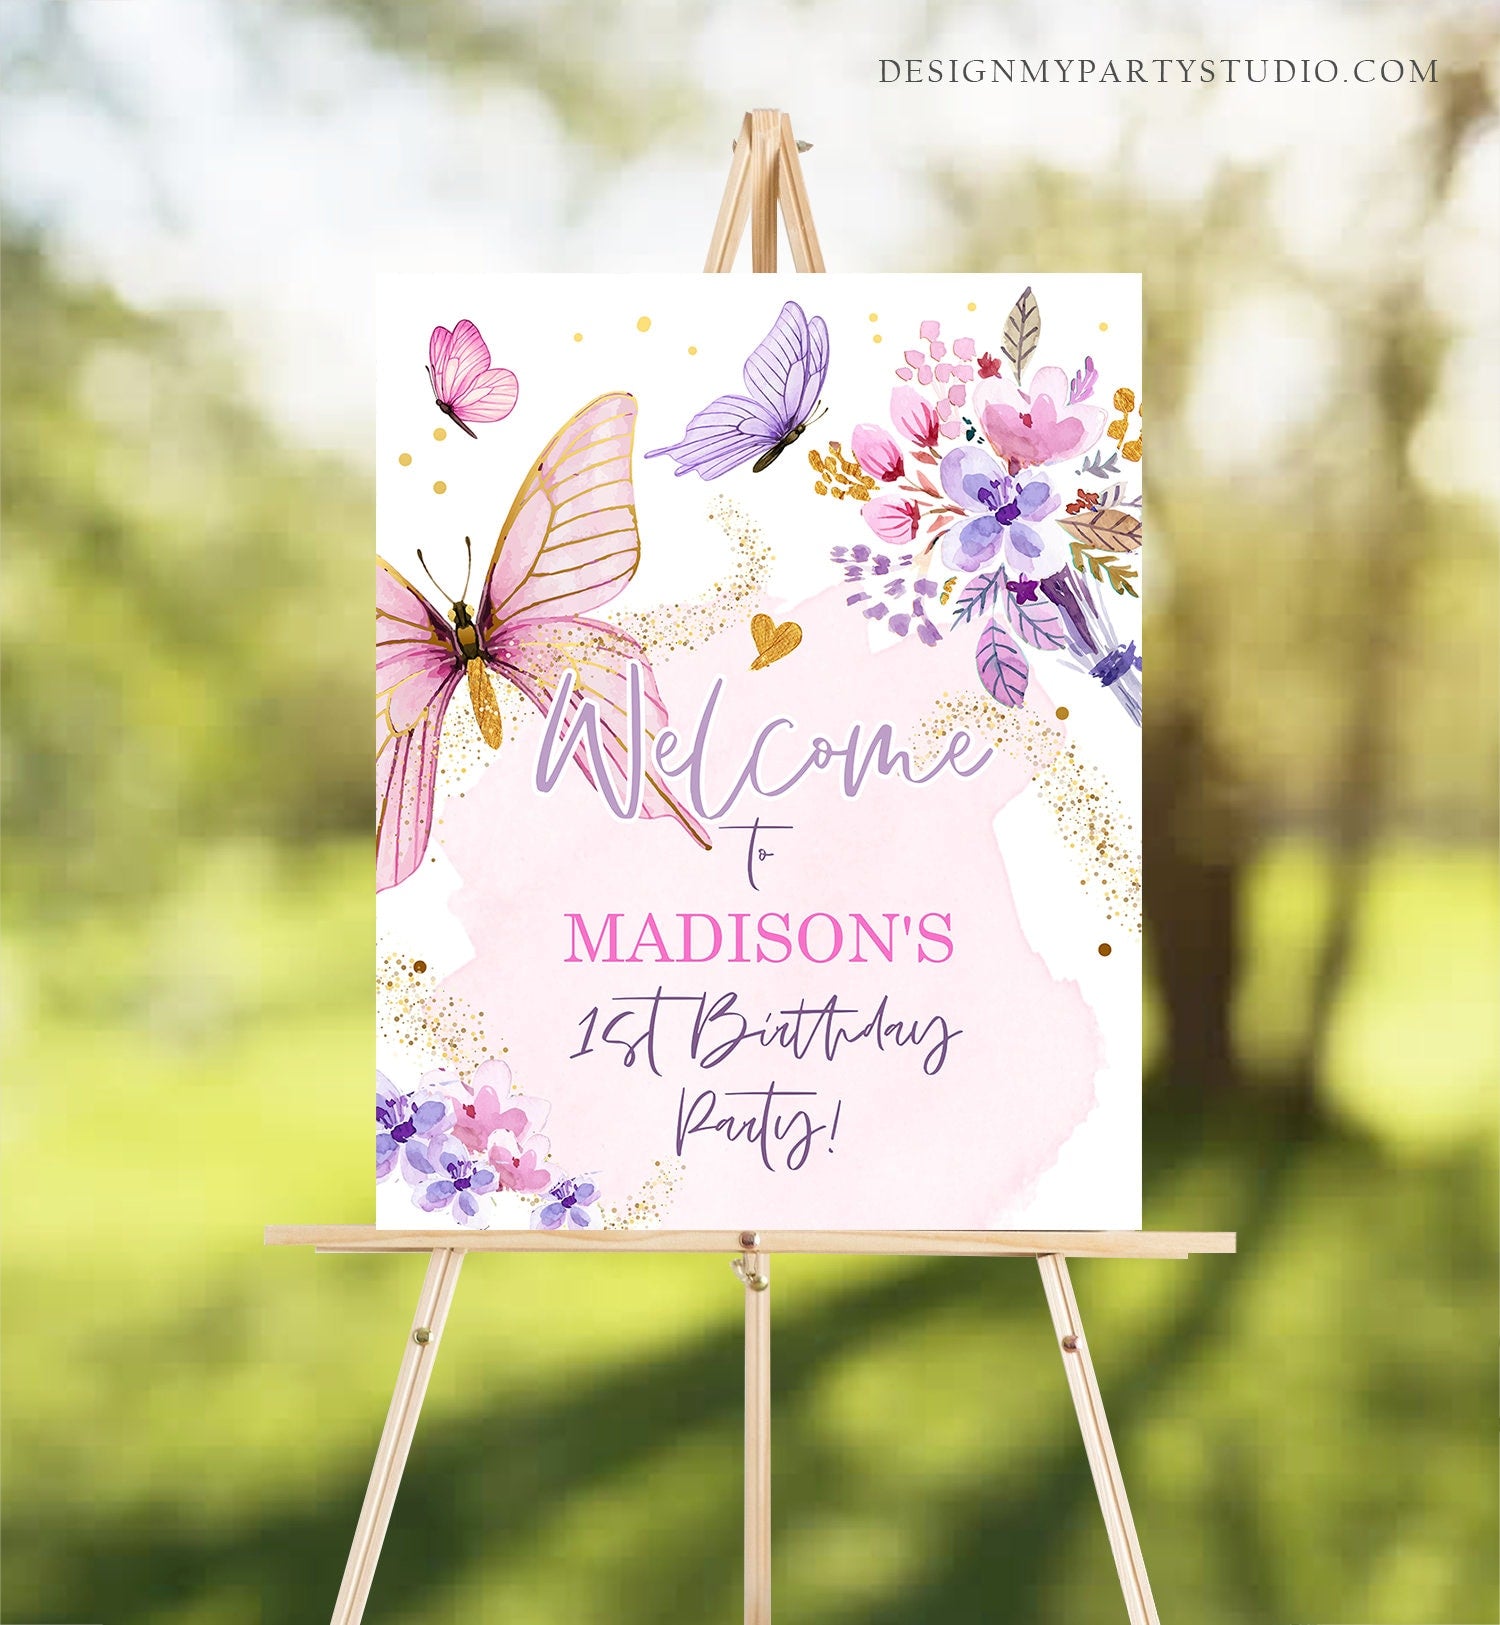 Editable Butterfly Welcome Sign Butterfly Birthday Party Butterfly Party Garden Girl Pink Gold Floral Purple Template PRINTABLE Corjl 0437